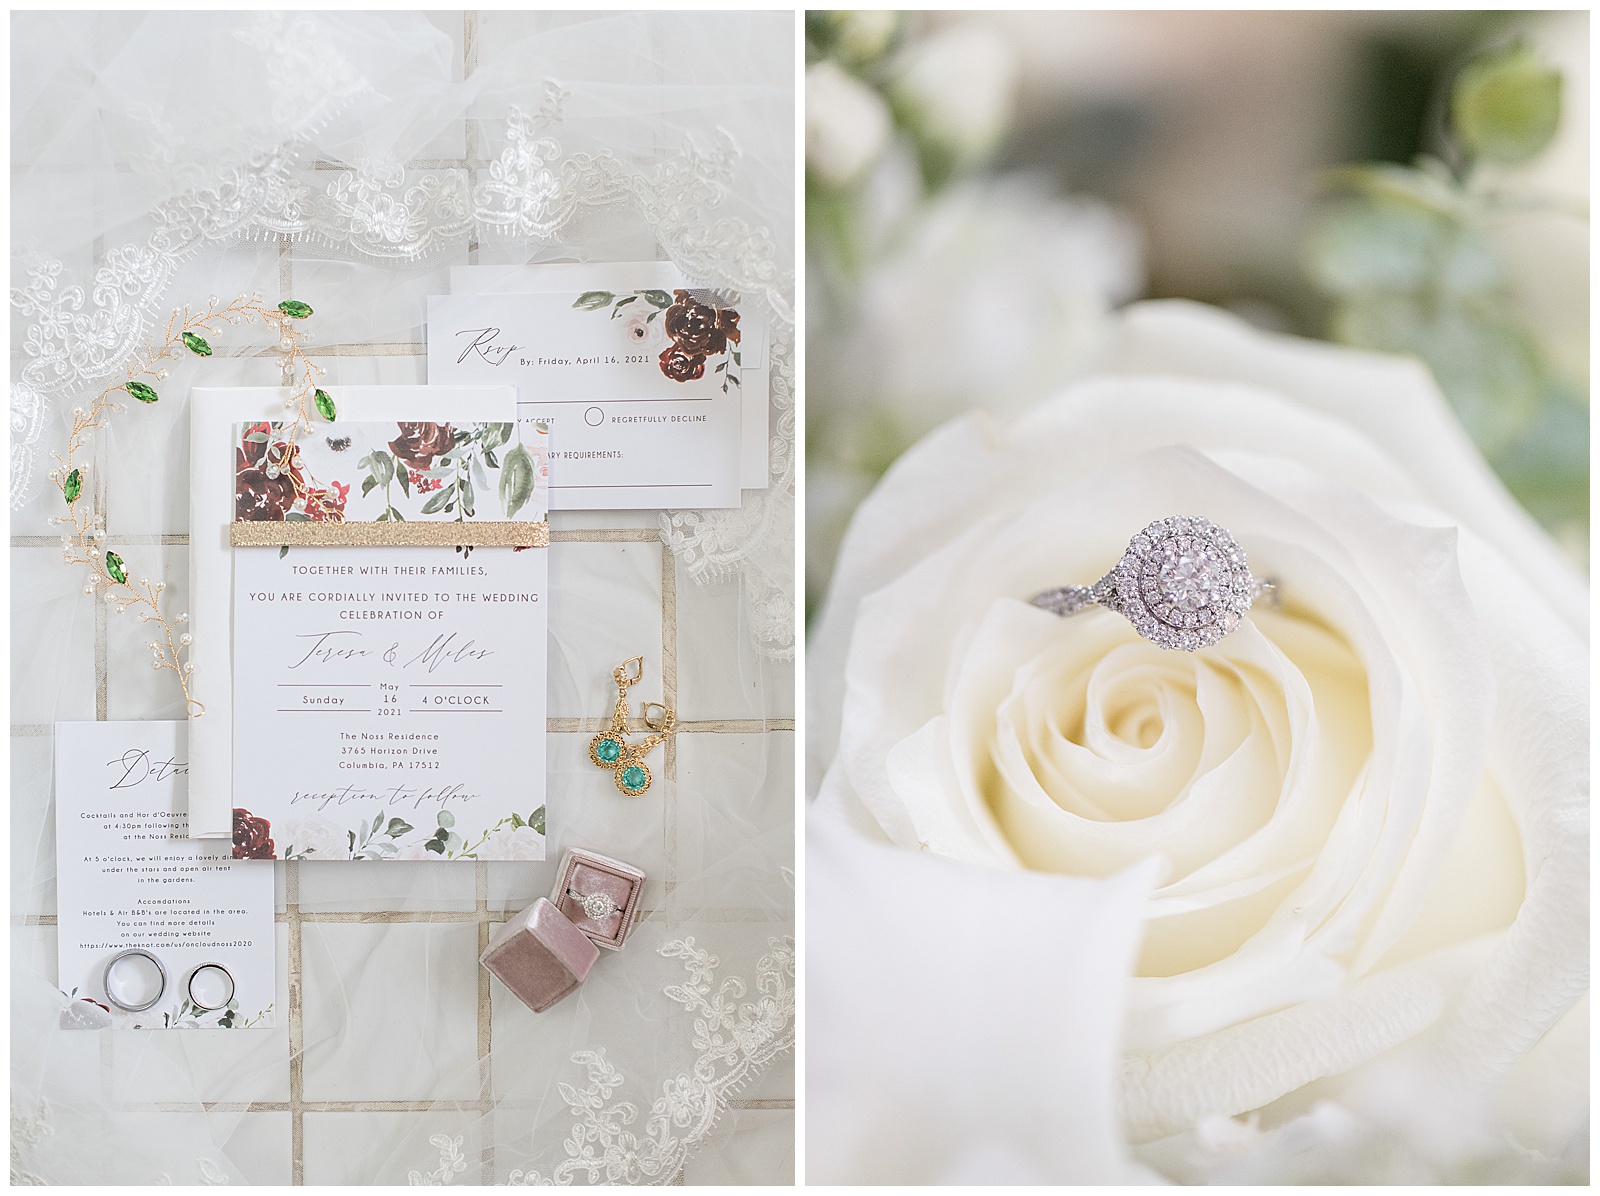 beautiful wedding invitation and diamond engagement ring on display surrounded by fresh flowers